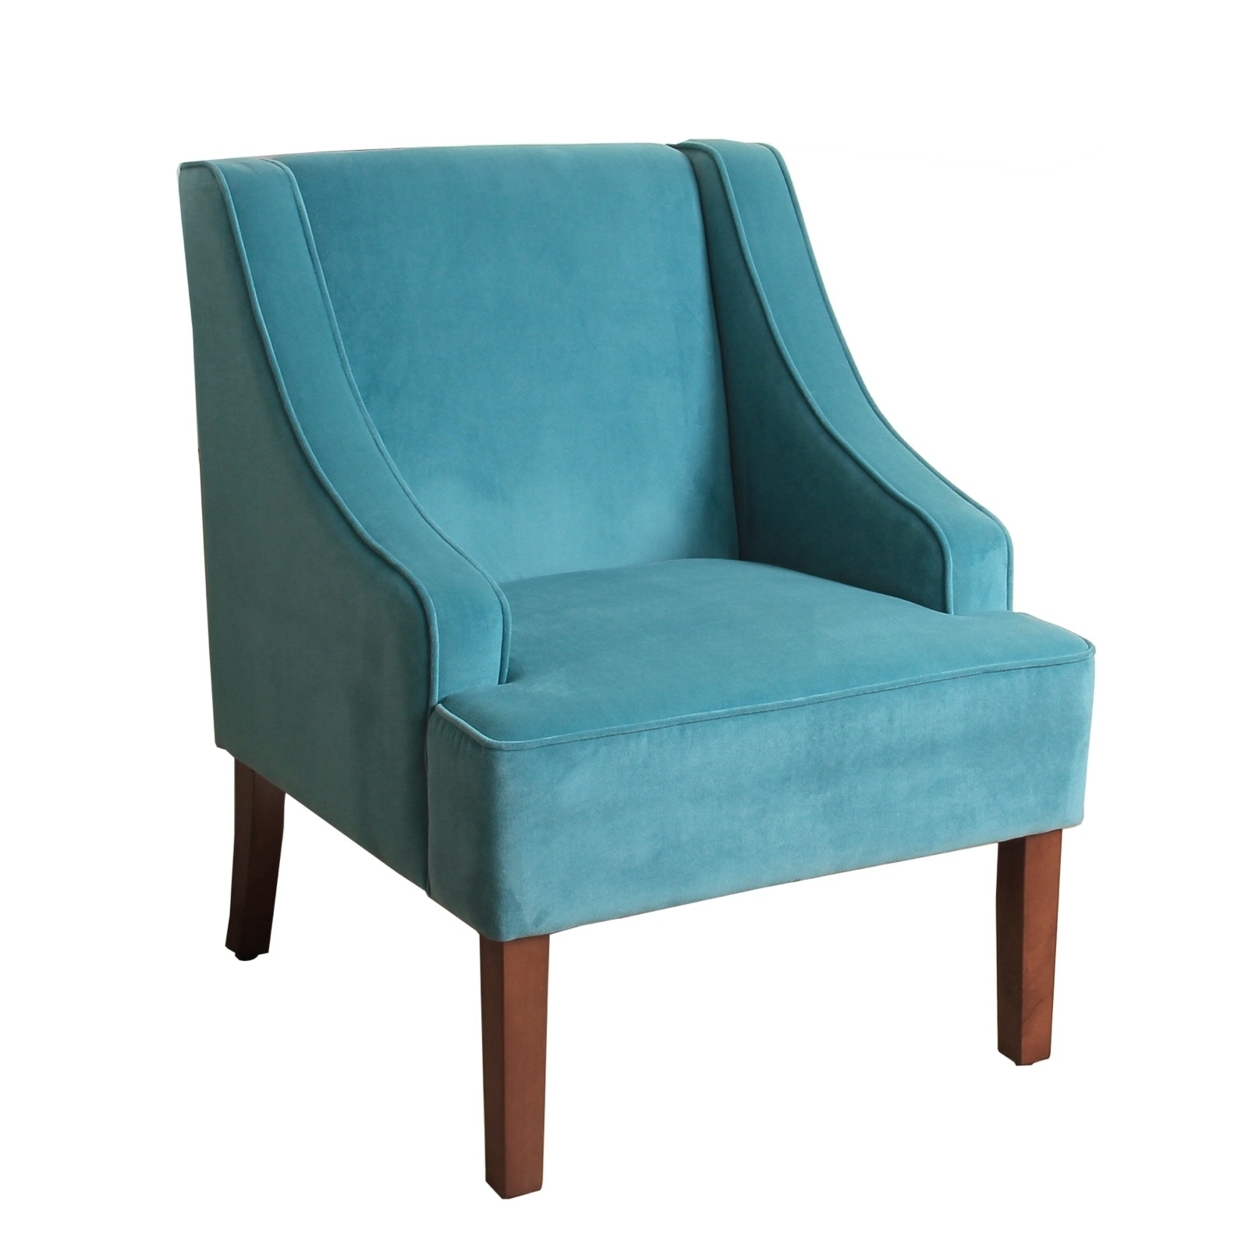 Fabric Upholstered Wooden Accent Chair with Wingback, Blue and Brown